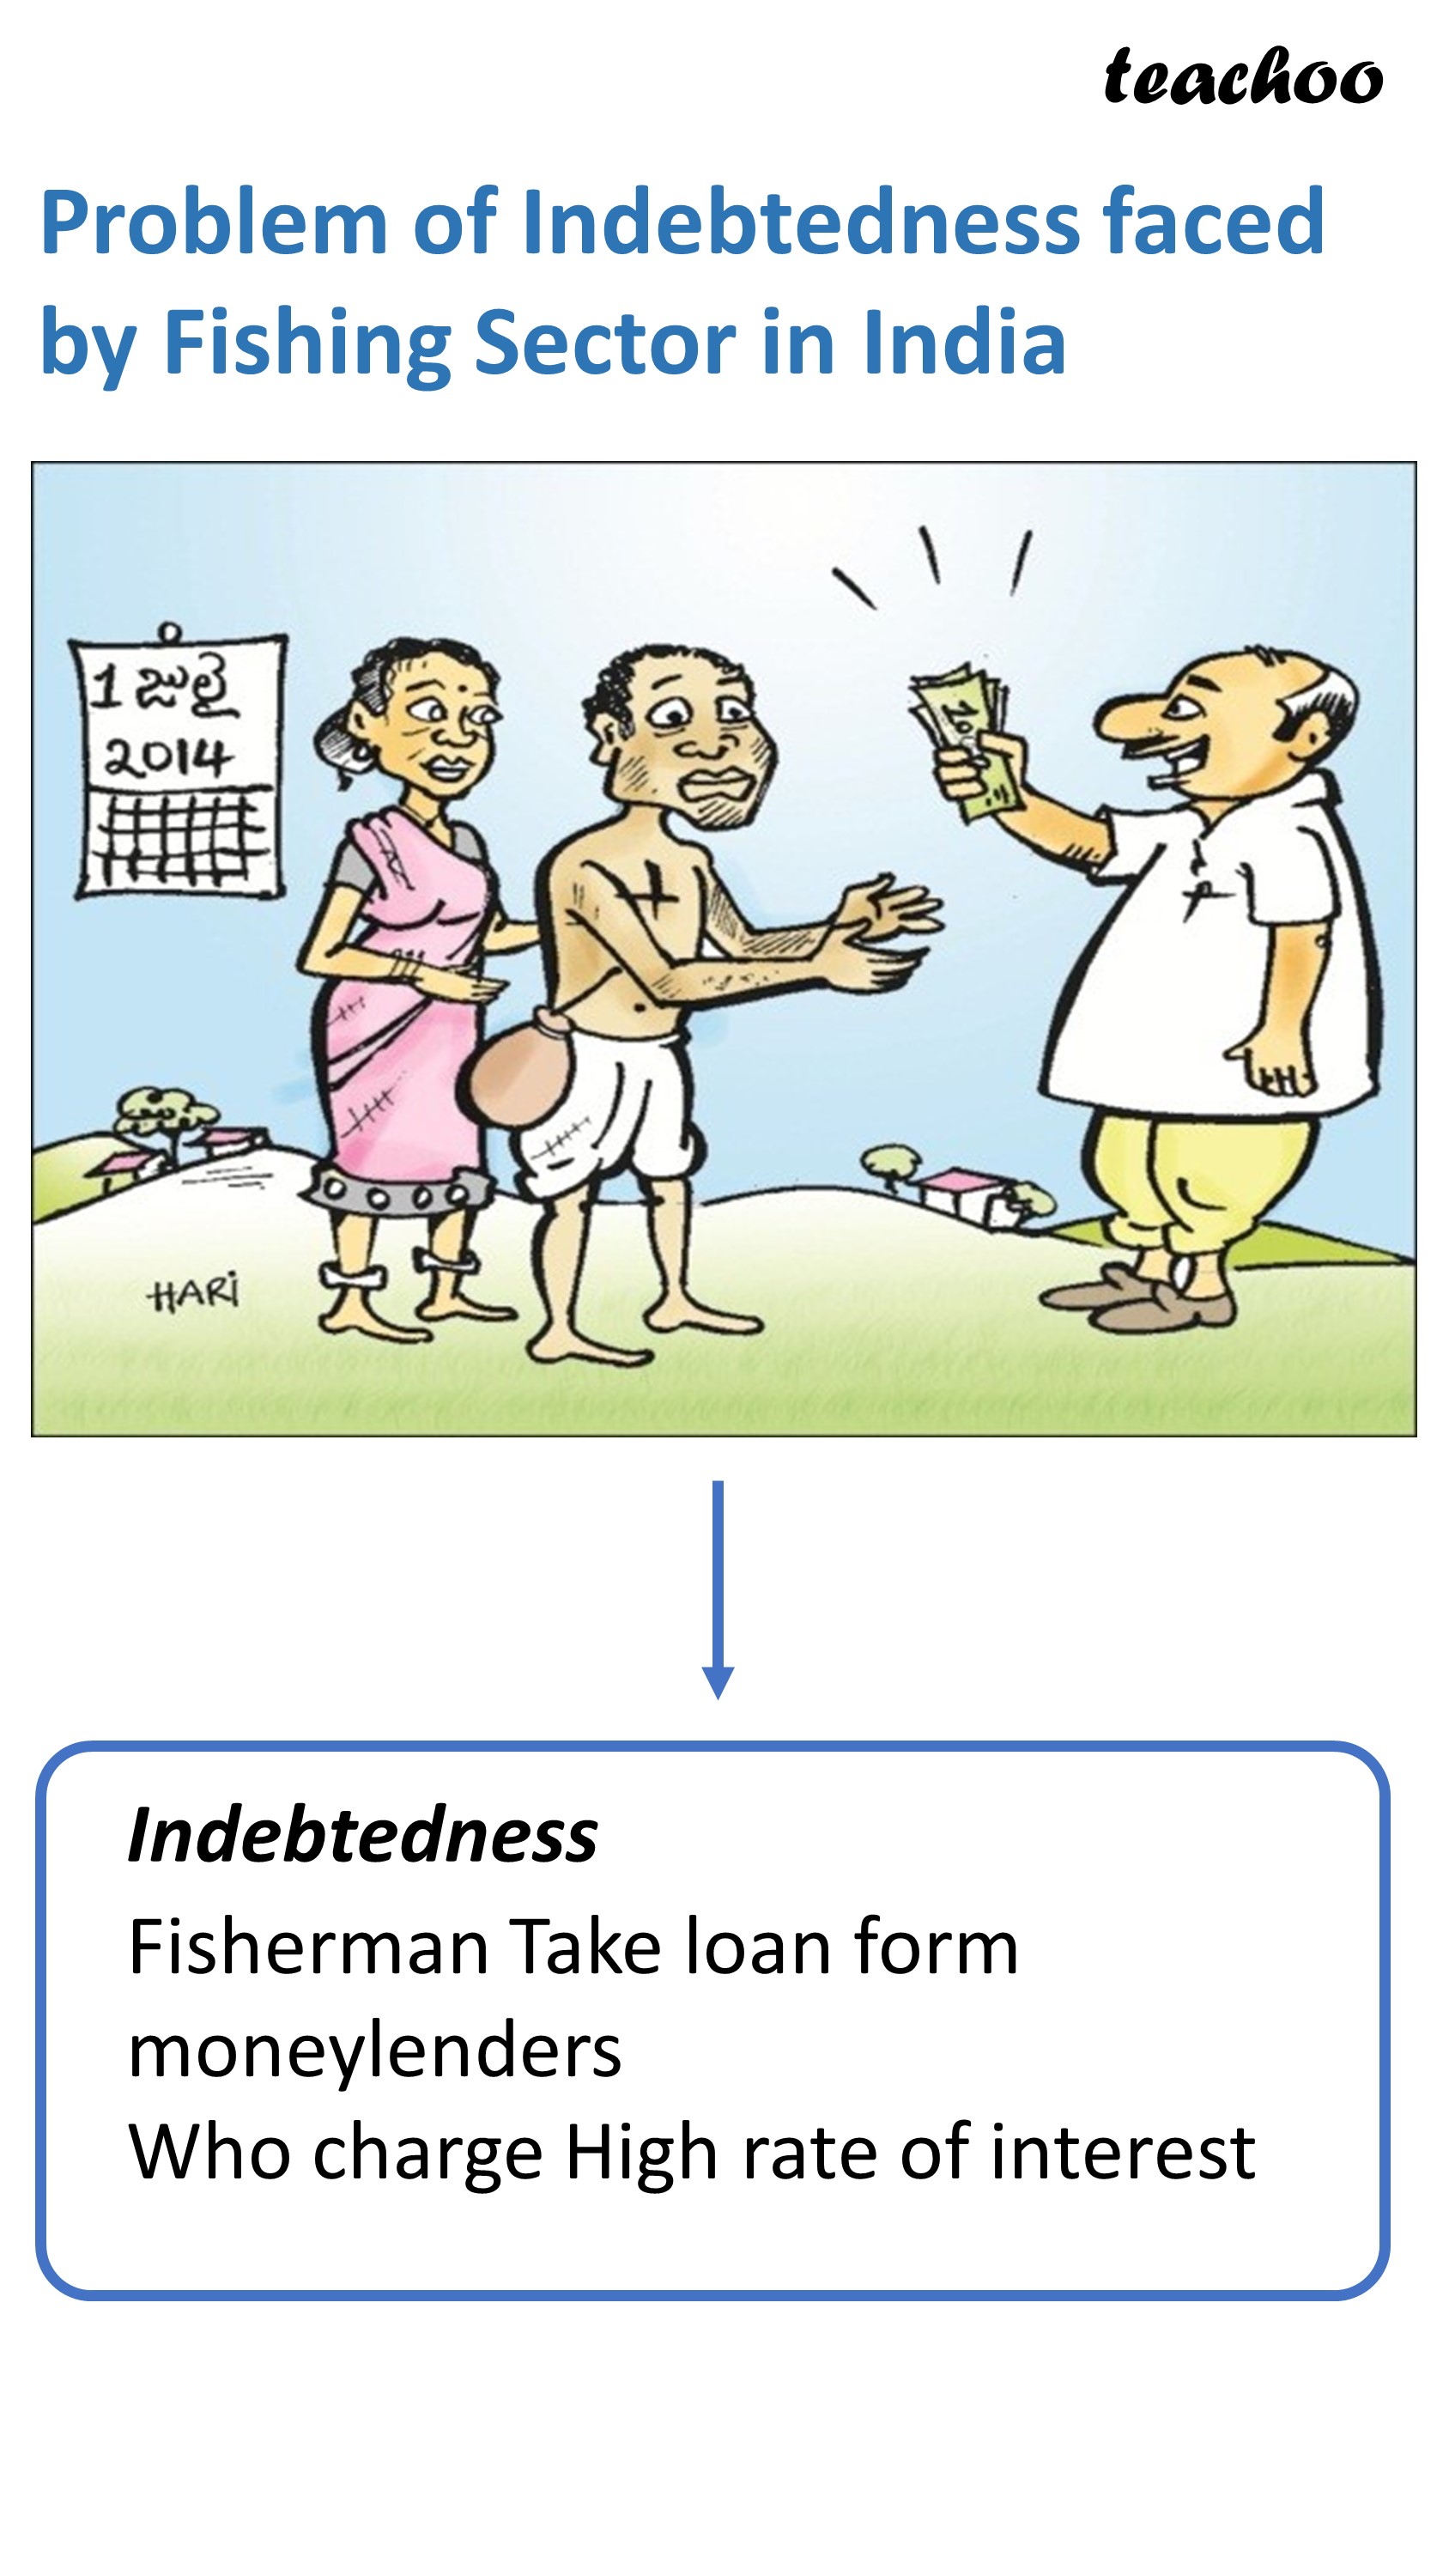 Problem of Indebtedness faced by Fishing Sector in India - Teachoo.JPG